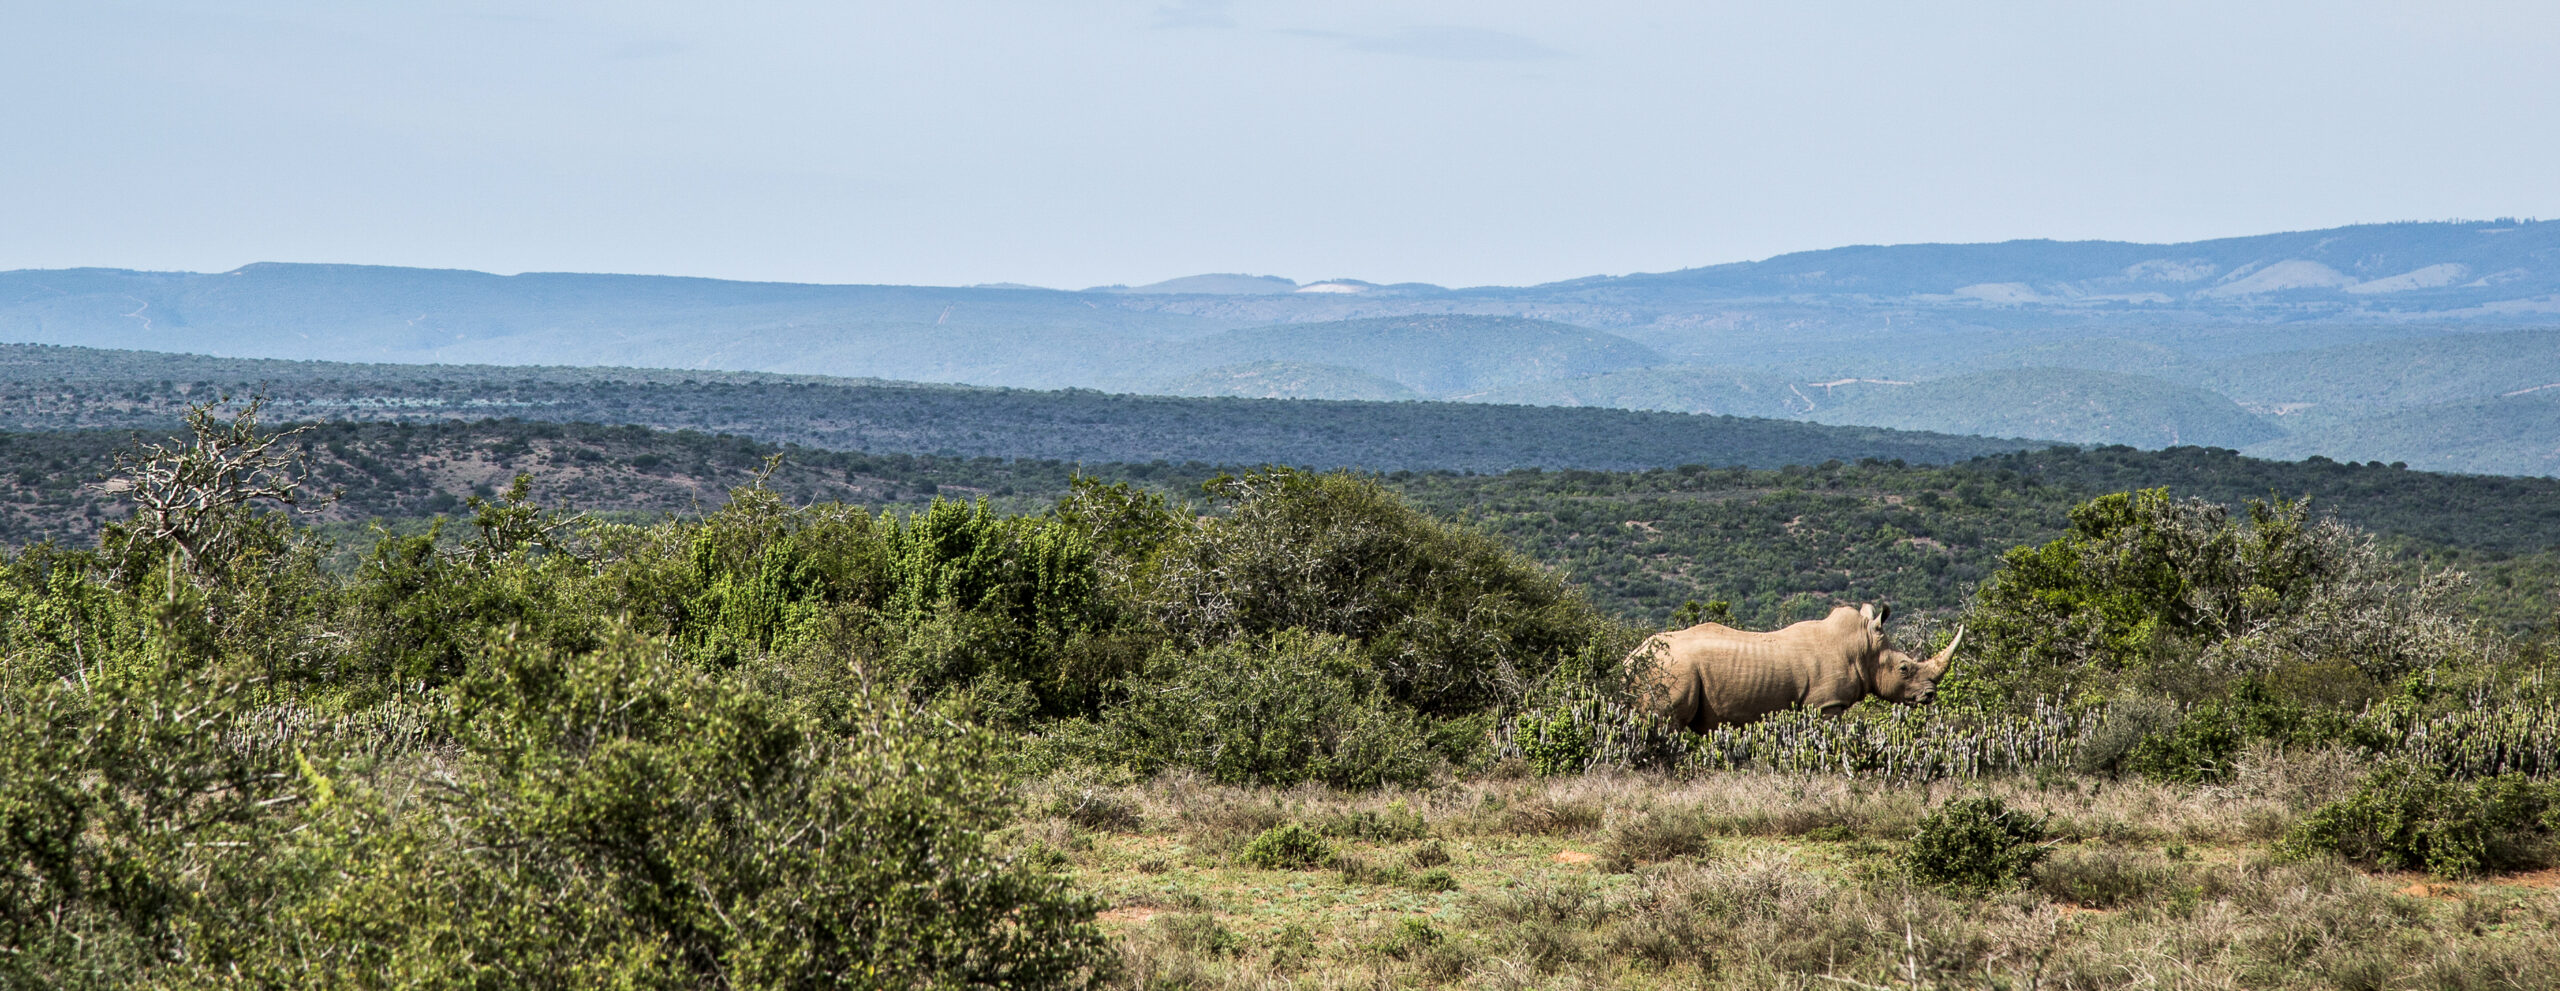 a rhino in a field with mountains in the background.